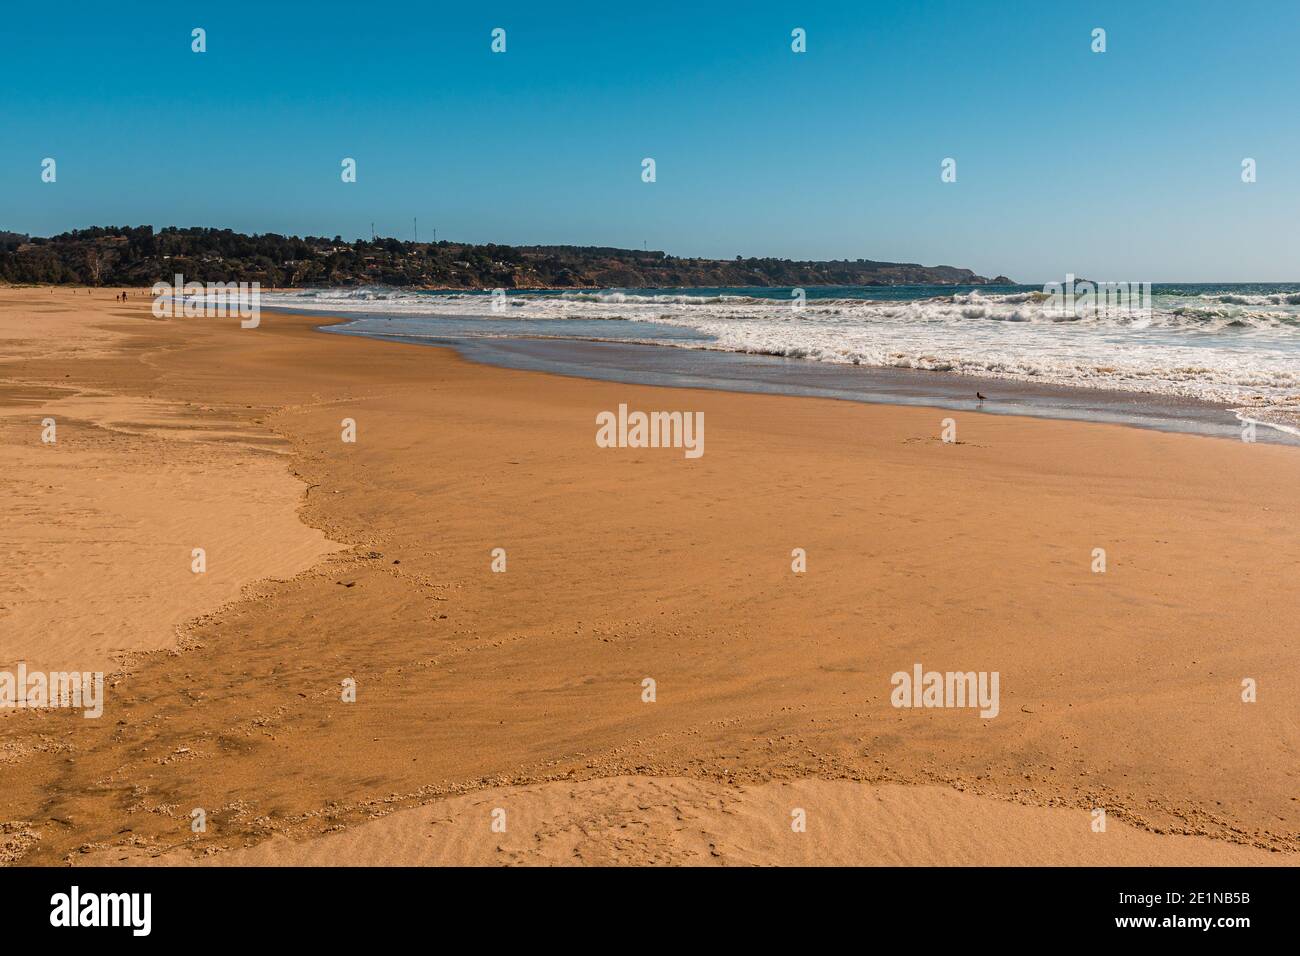 Summer vacations in Quintay beach on a sunny day Stock Photo